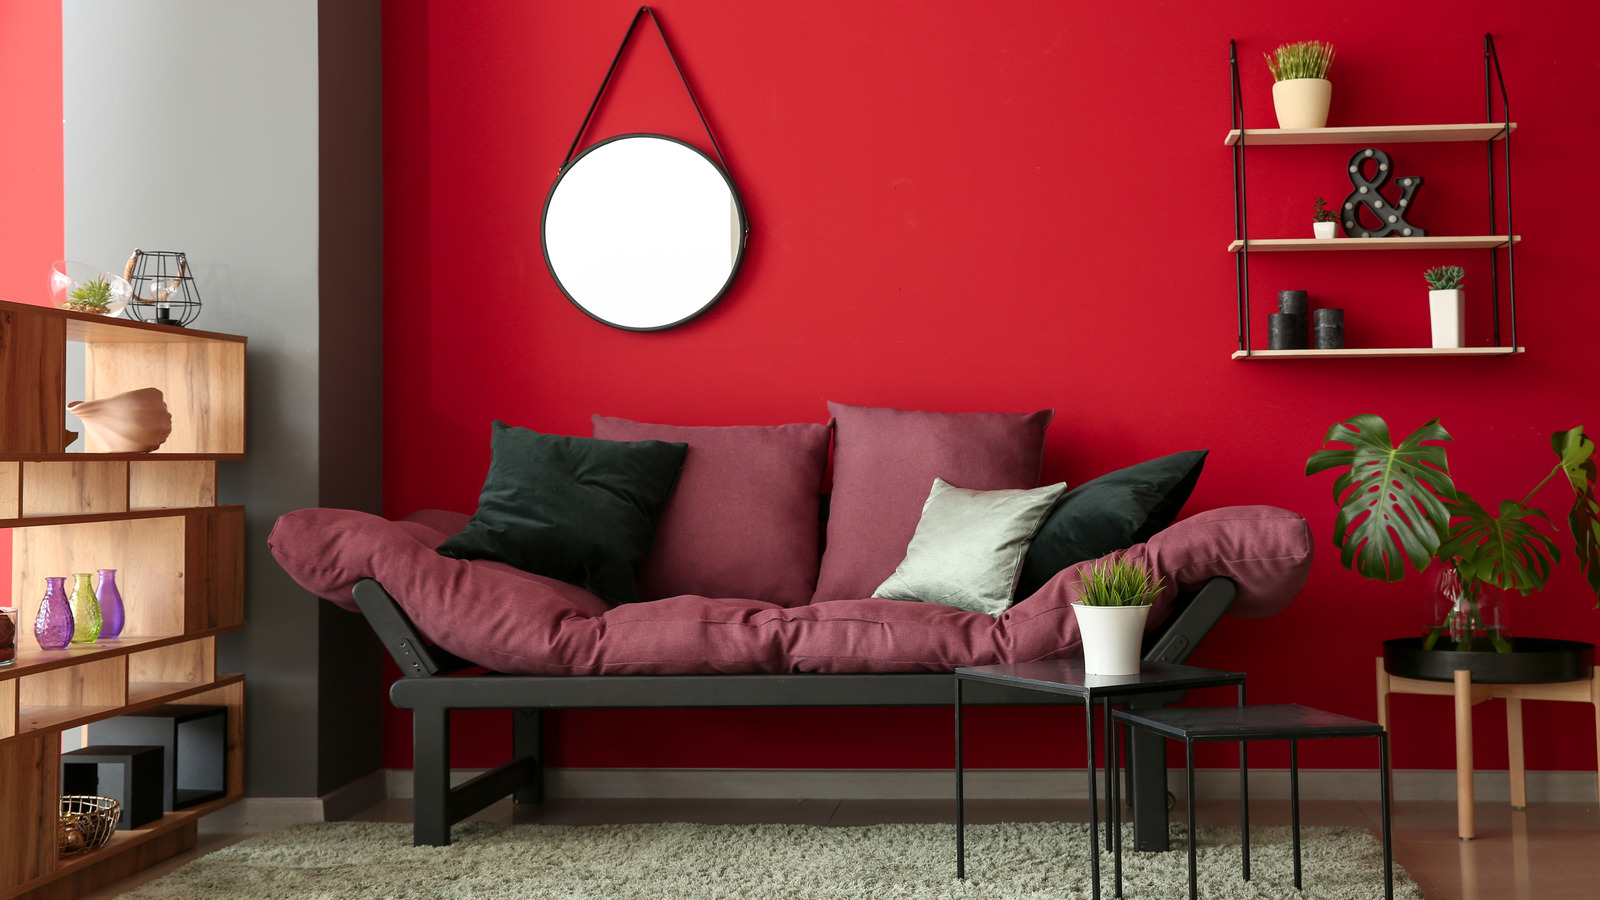 red paint colors for bedrooms